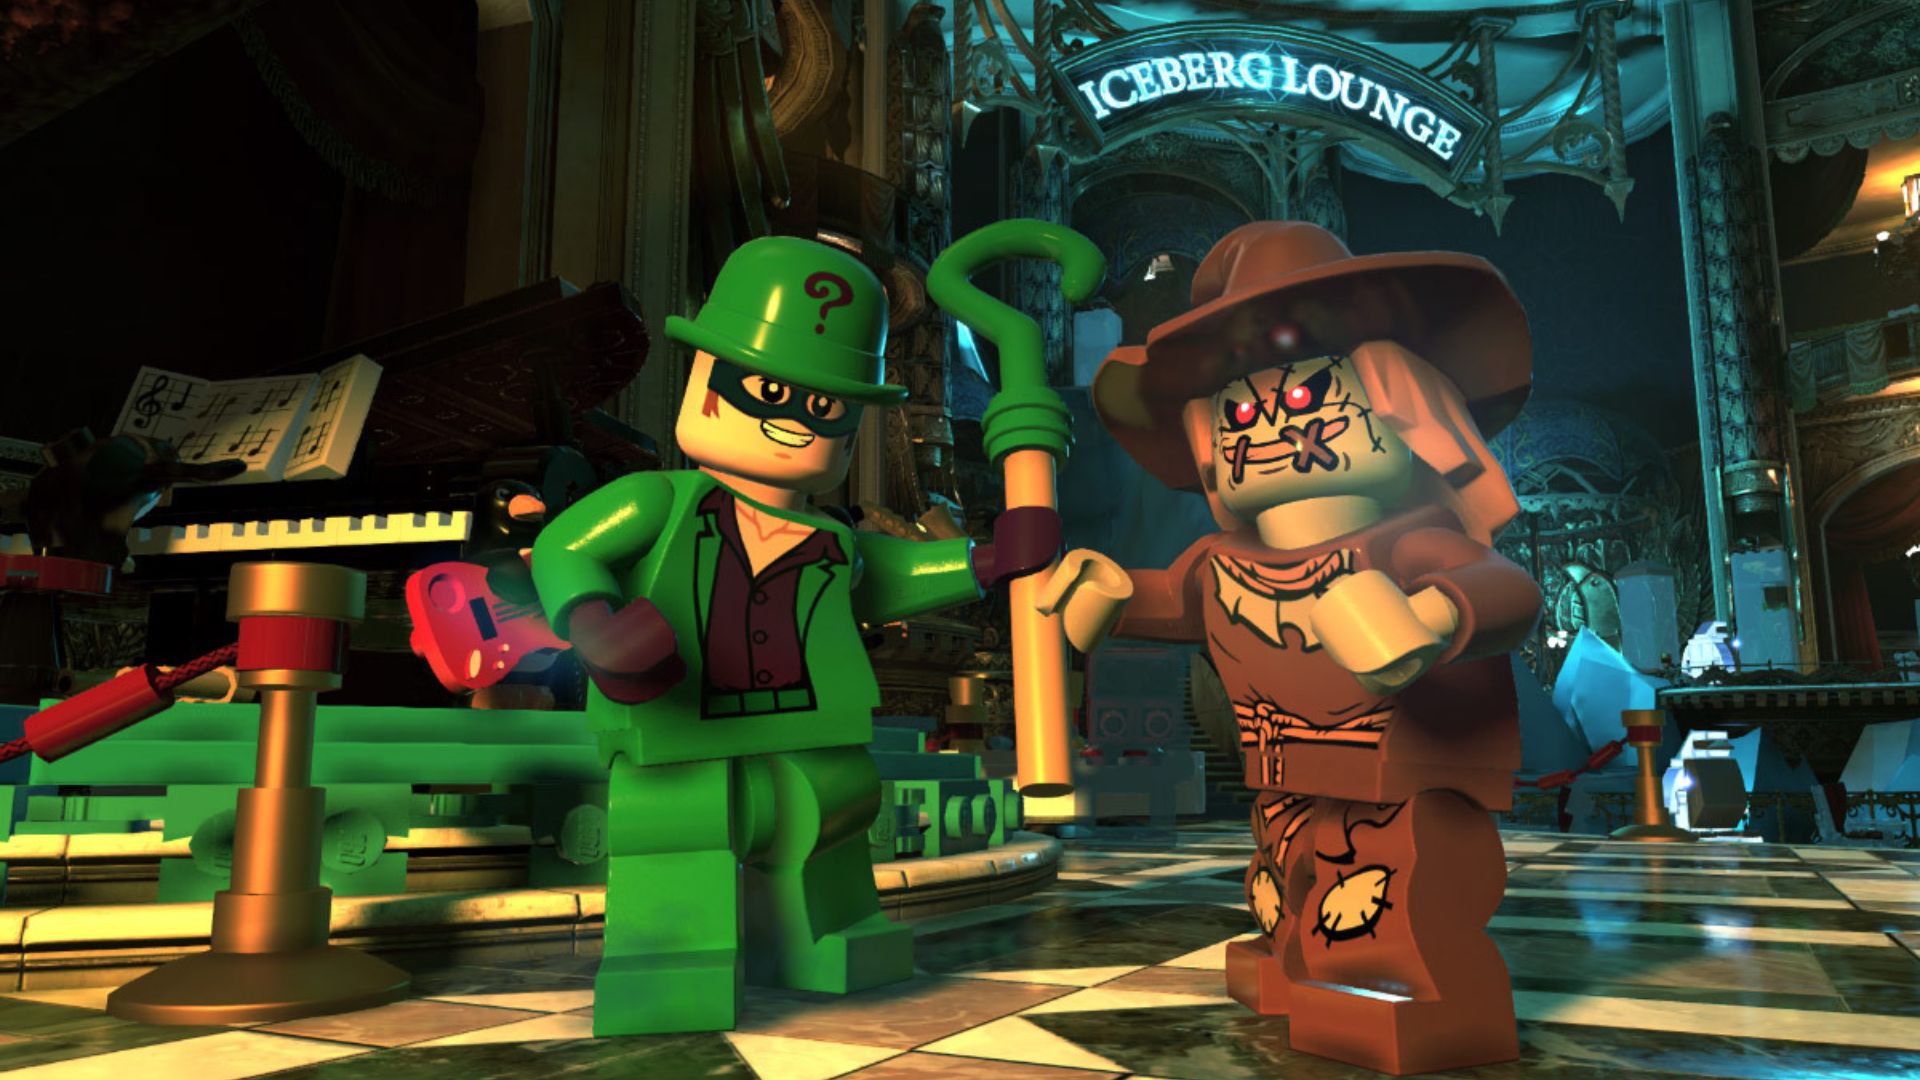 Batman games - the Riddler and Scarecrow in Lego form -- a green-suited man with a question mark staff and one on his hat too, and a man dressed as a scarecrow respectively -- standing in a parquet-floored scene with a neon sign behind.